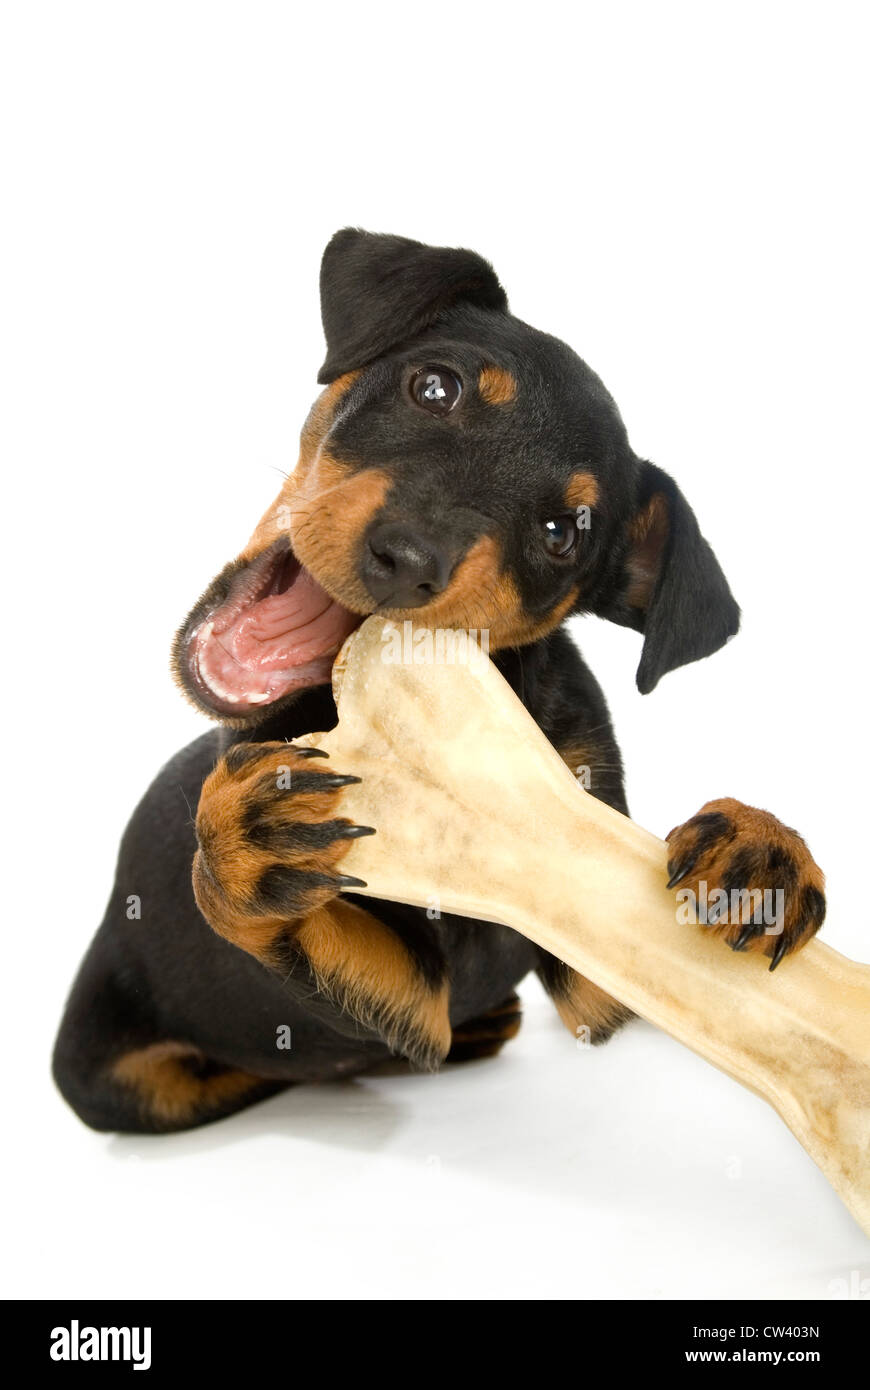 Jagdterrier, German Hunt Terrier. Puppy gnawing at big chew bone. Studio picture against a white background Stock Photo